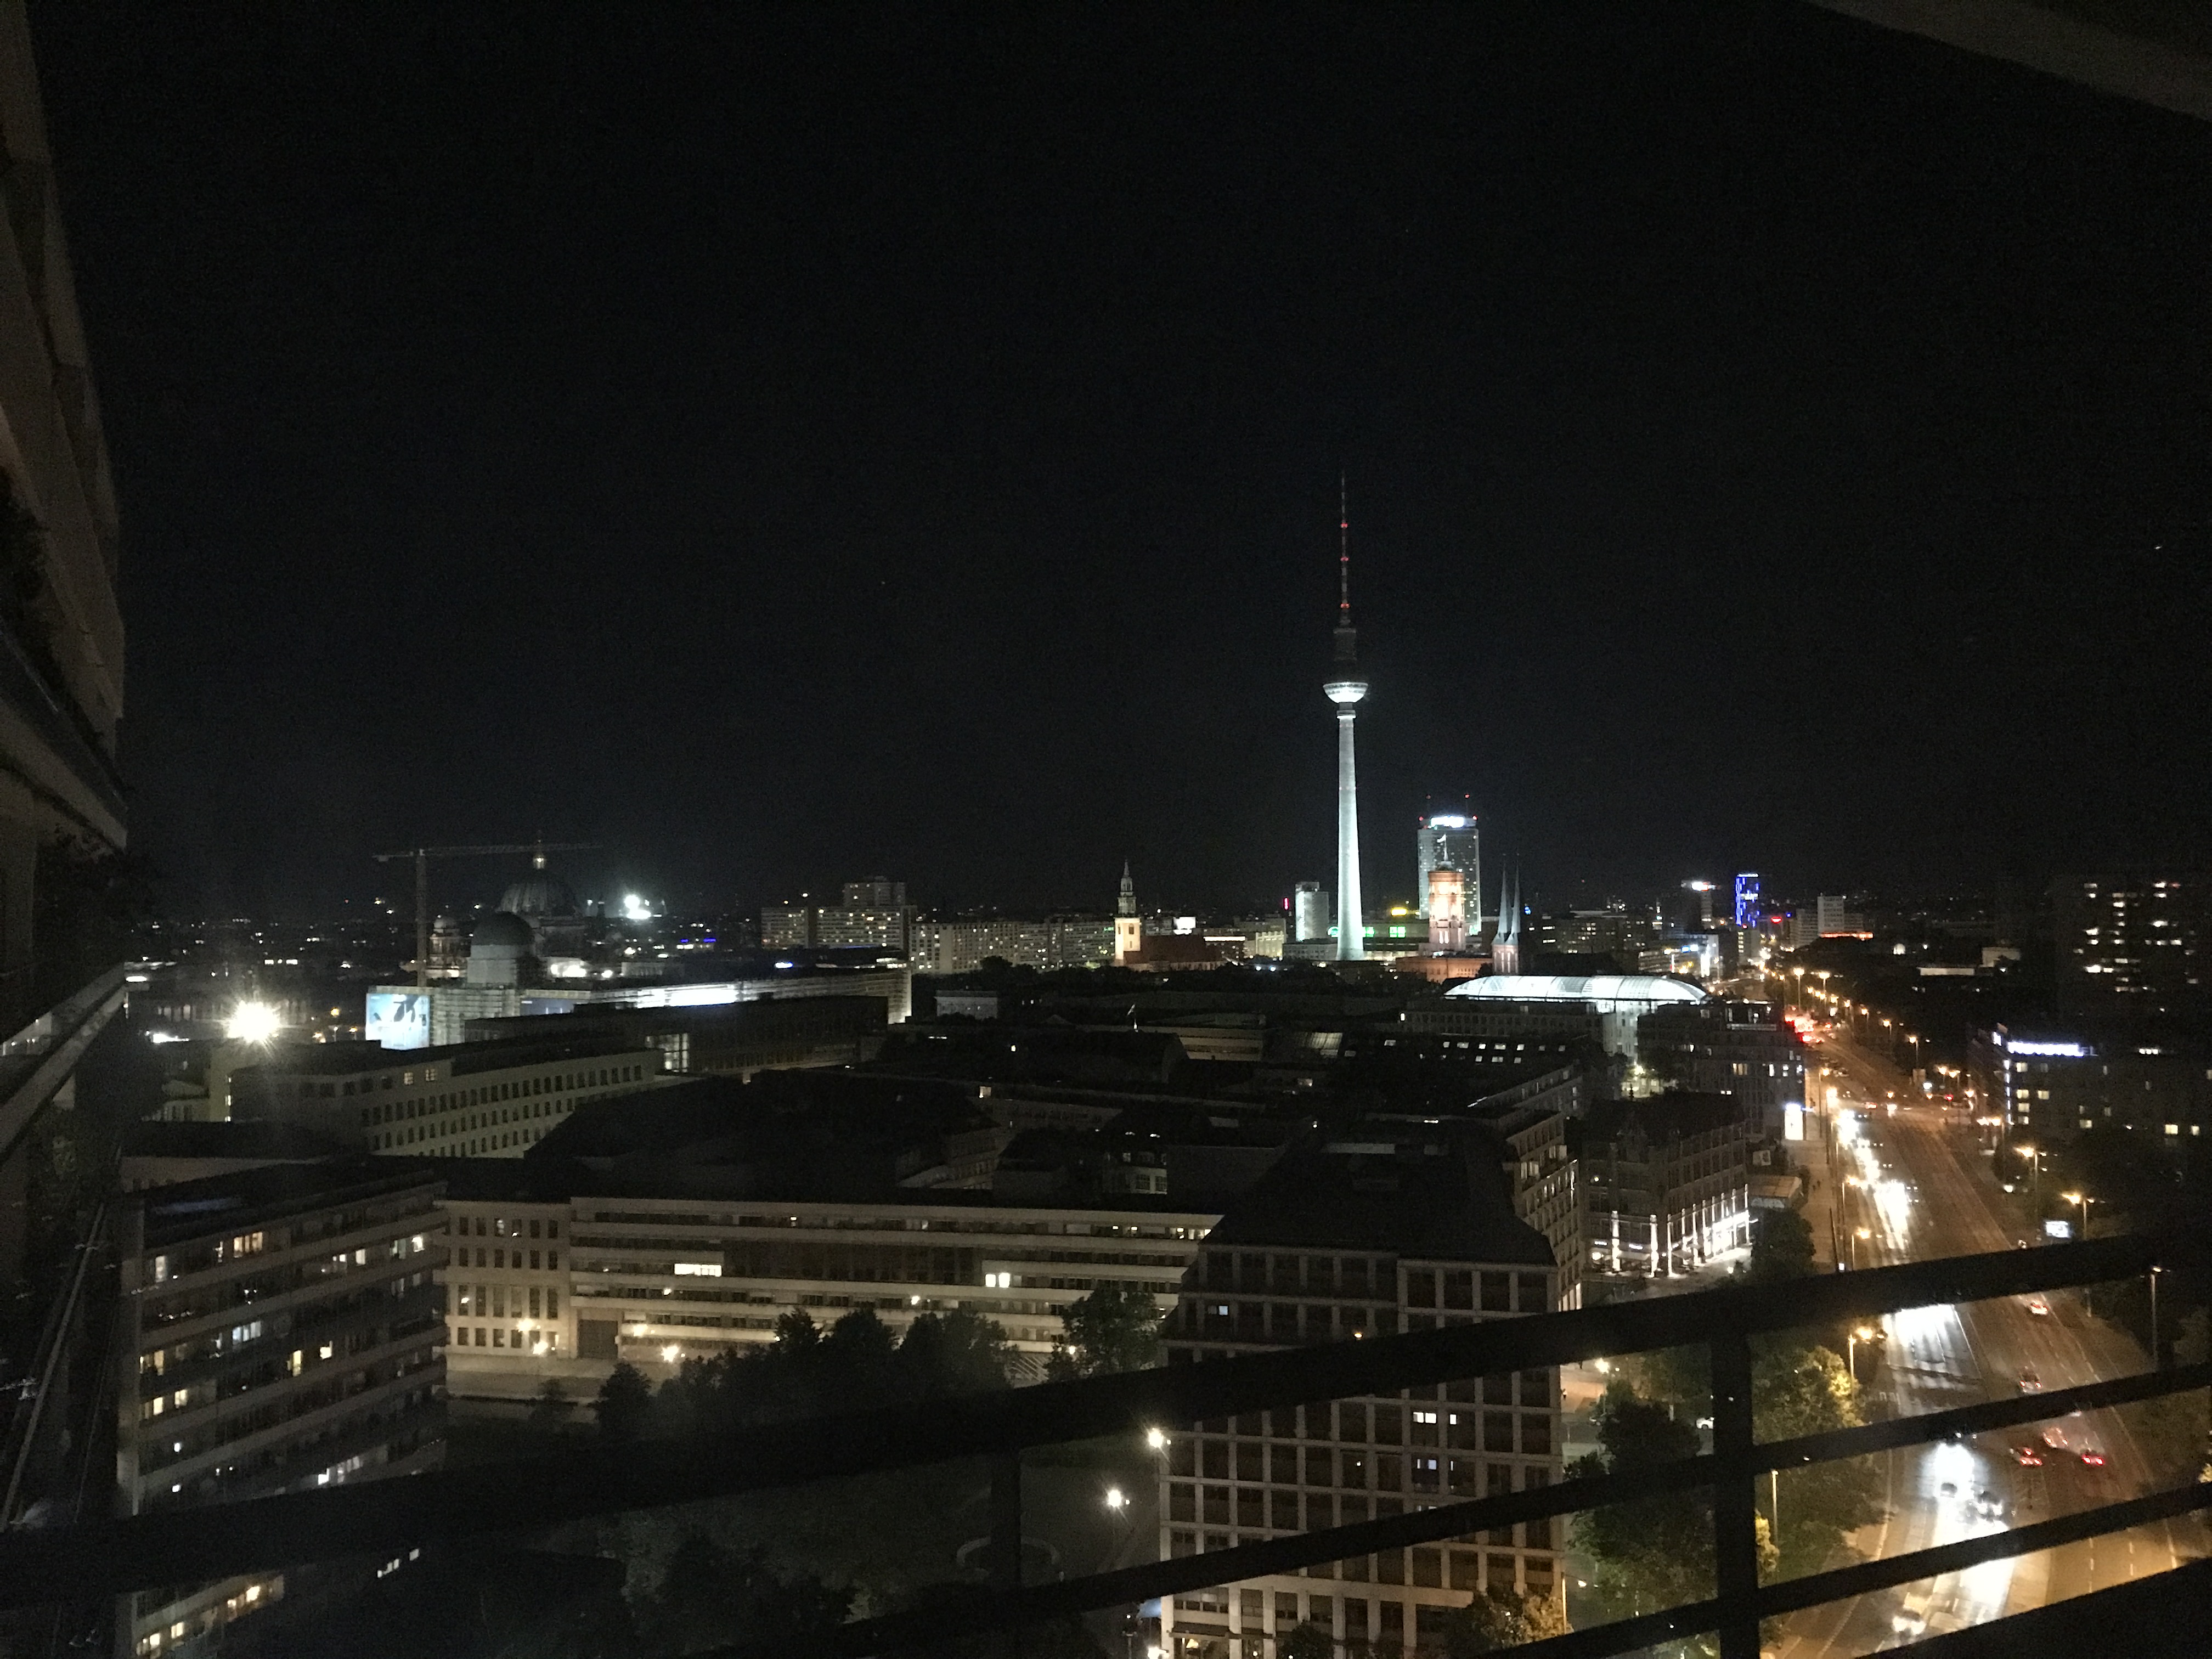 The view of the TV Tower from my Airbnb.